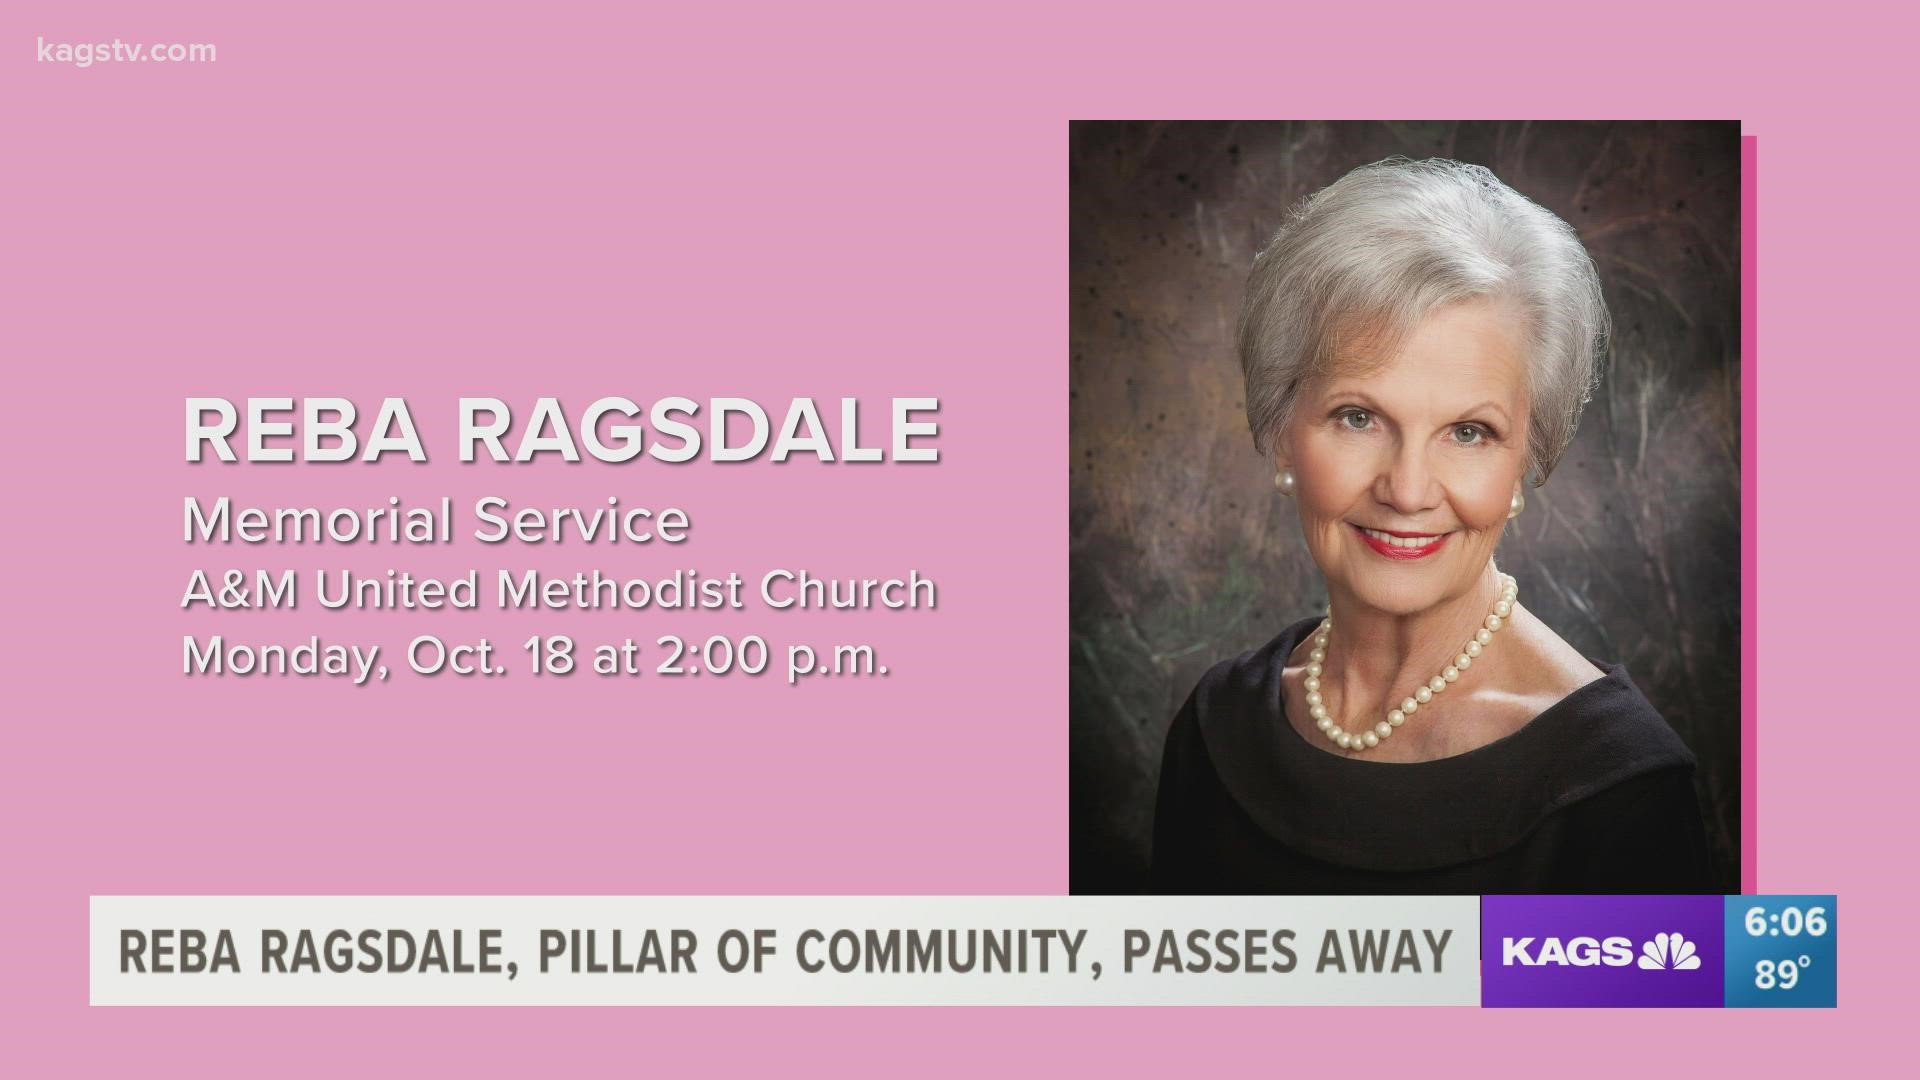 Ragsdale was active in the community and was the first female president of the Bryan Rotary Club